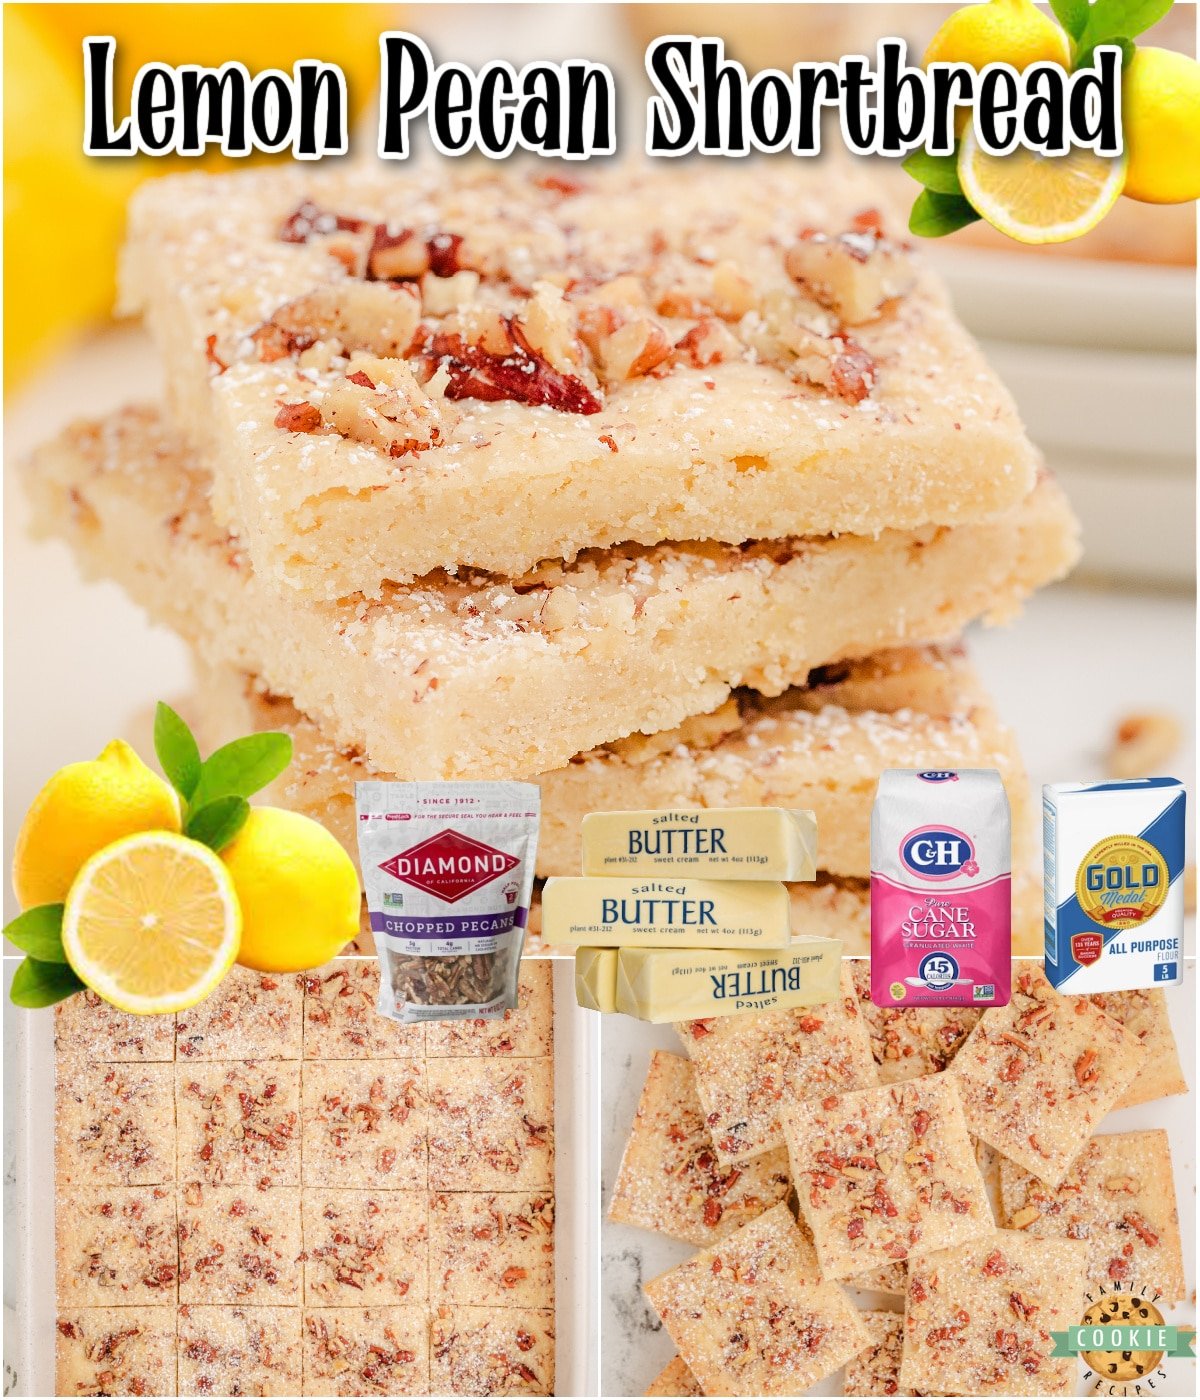 Lemon Pecan Shortbread Squares are a classic dessert that are known for their buttery, crumbly texture & bright, tangy flavor. To make these soft lemon cookies, all you need is a few simple ingredients: butter, sugar, flour, pecans, lemon extract, and lemon zest.